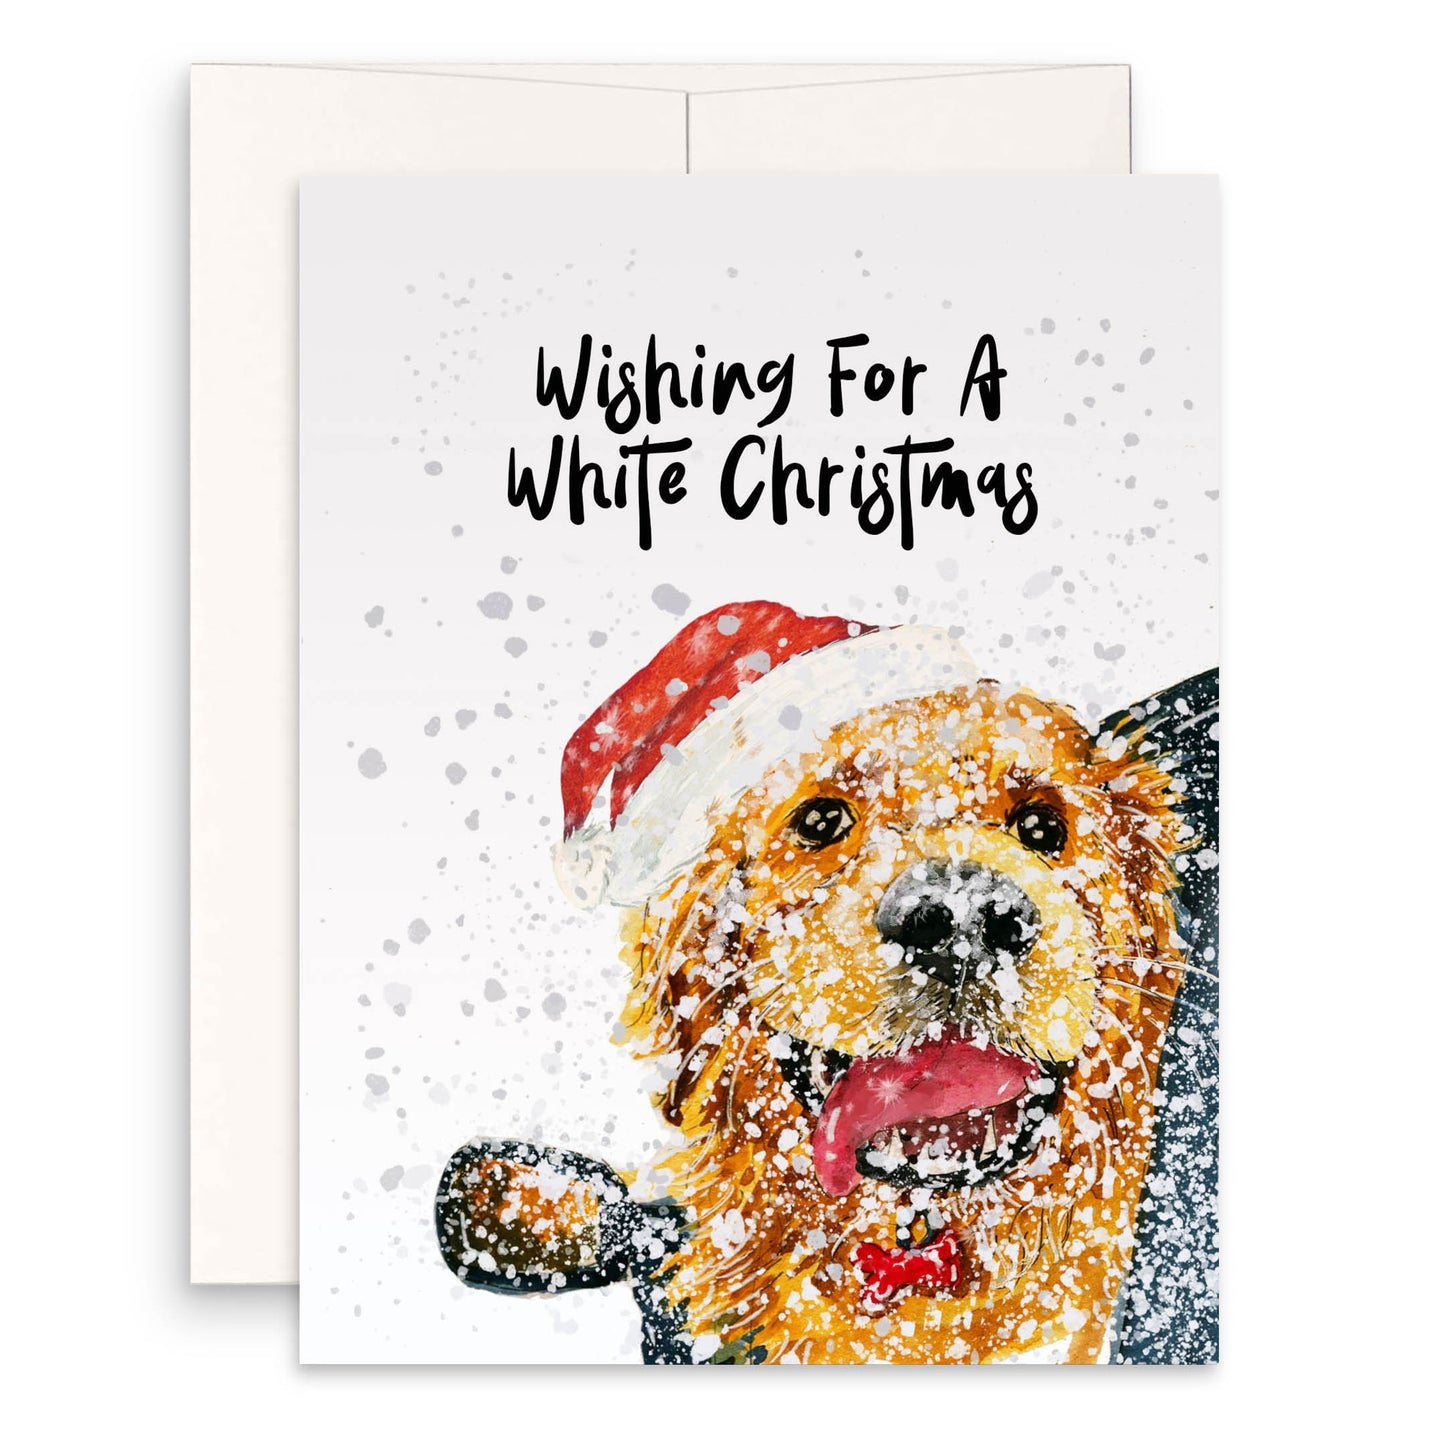 Dog White Christmas Card Funny - Golden Retriever Dog Car Ride Funny Holiday Cards For Dog Lovers - Handmade By Liyana Studio Greetings